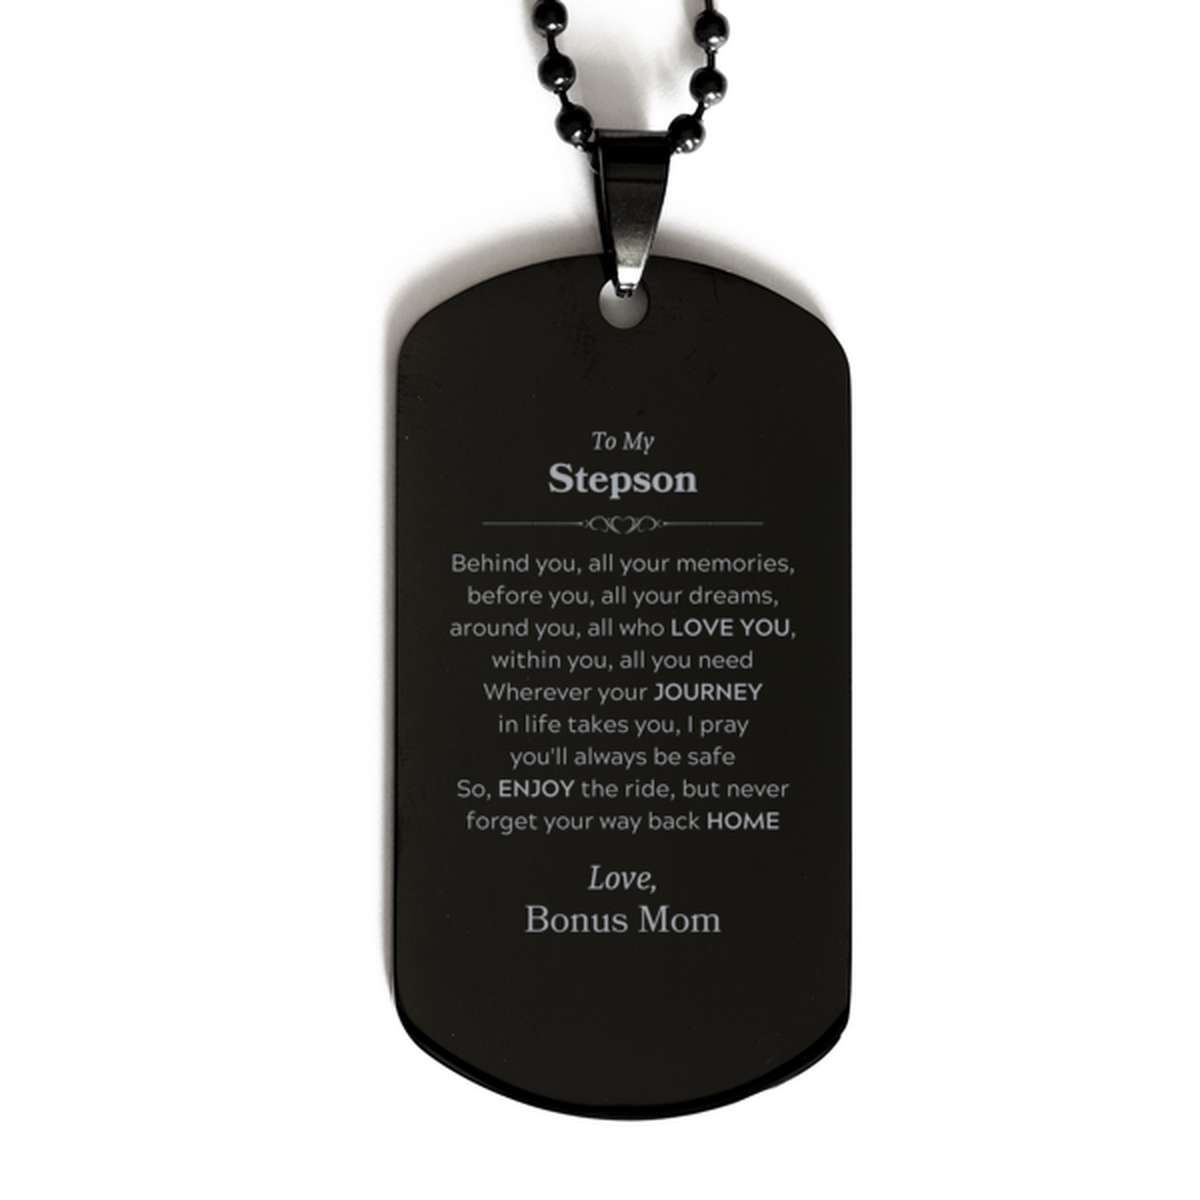 To My Stepson Graduation Gifts from Bonus Mom, Stepson Black Dog Tag Christmas Birthday Gifts for Stepson Behind you, all your memories, before you, all your dreams. Love, Bonus Mom